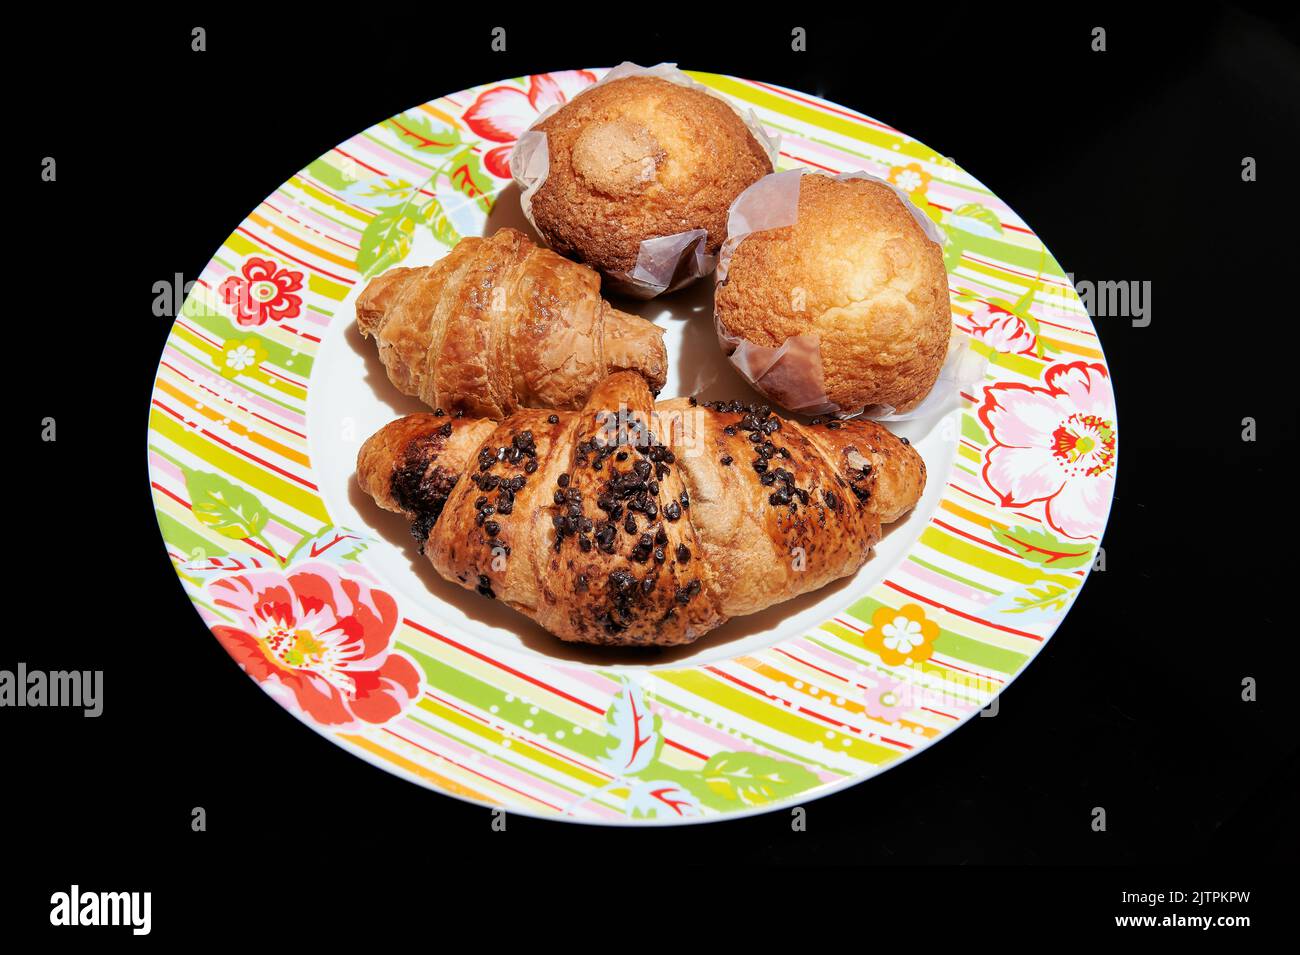 Plate with chocolate croissants and muffins for breakfast Stock Photo